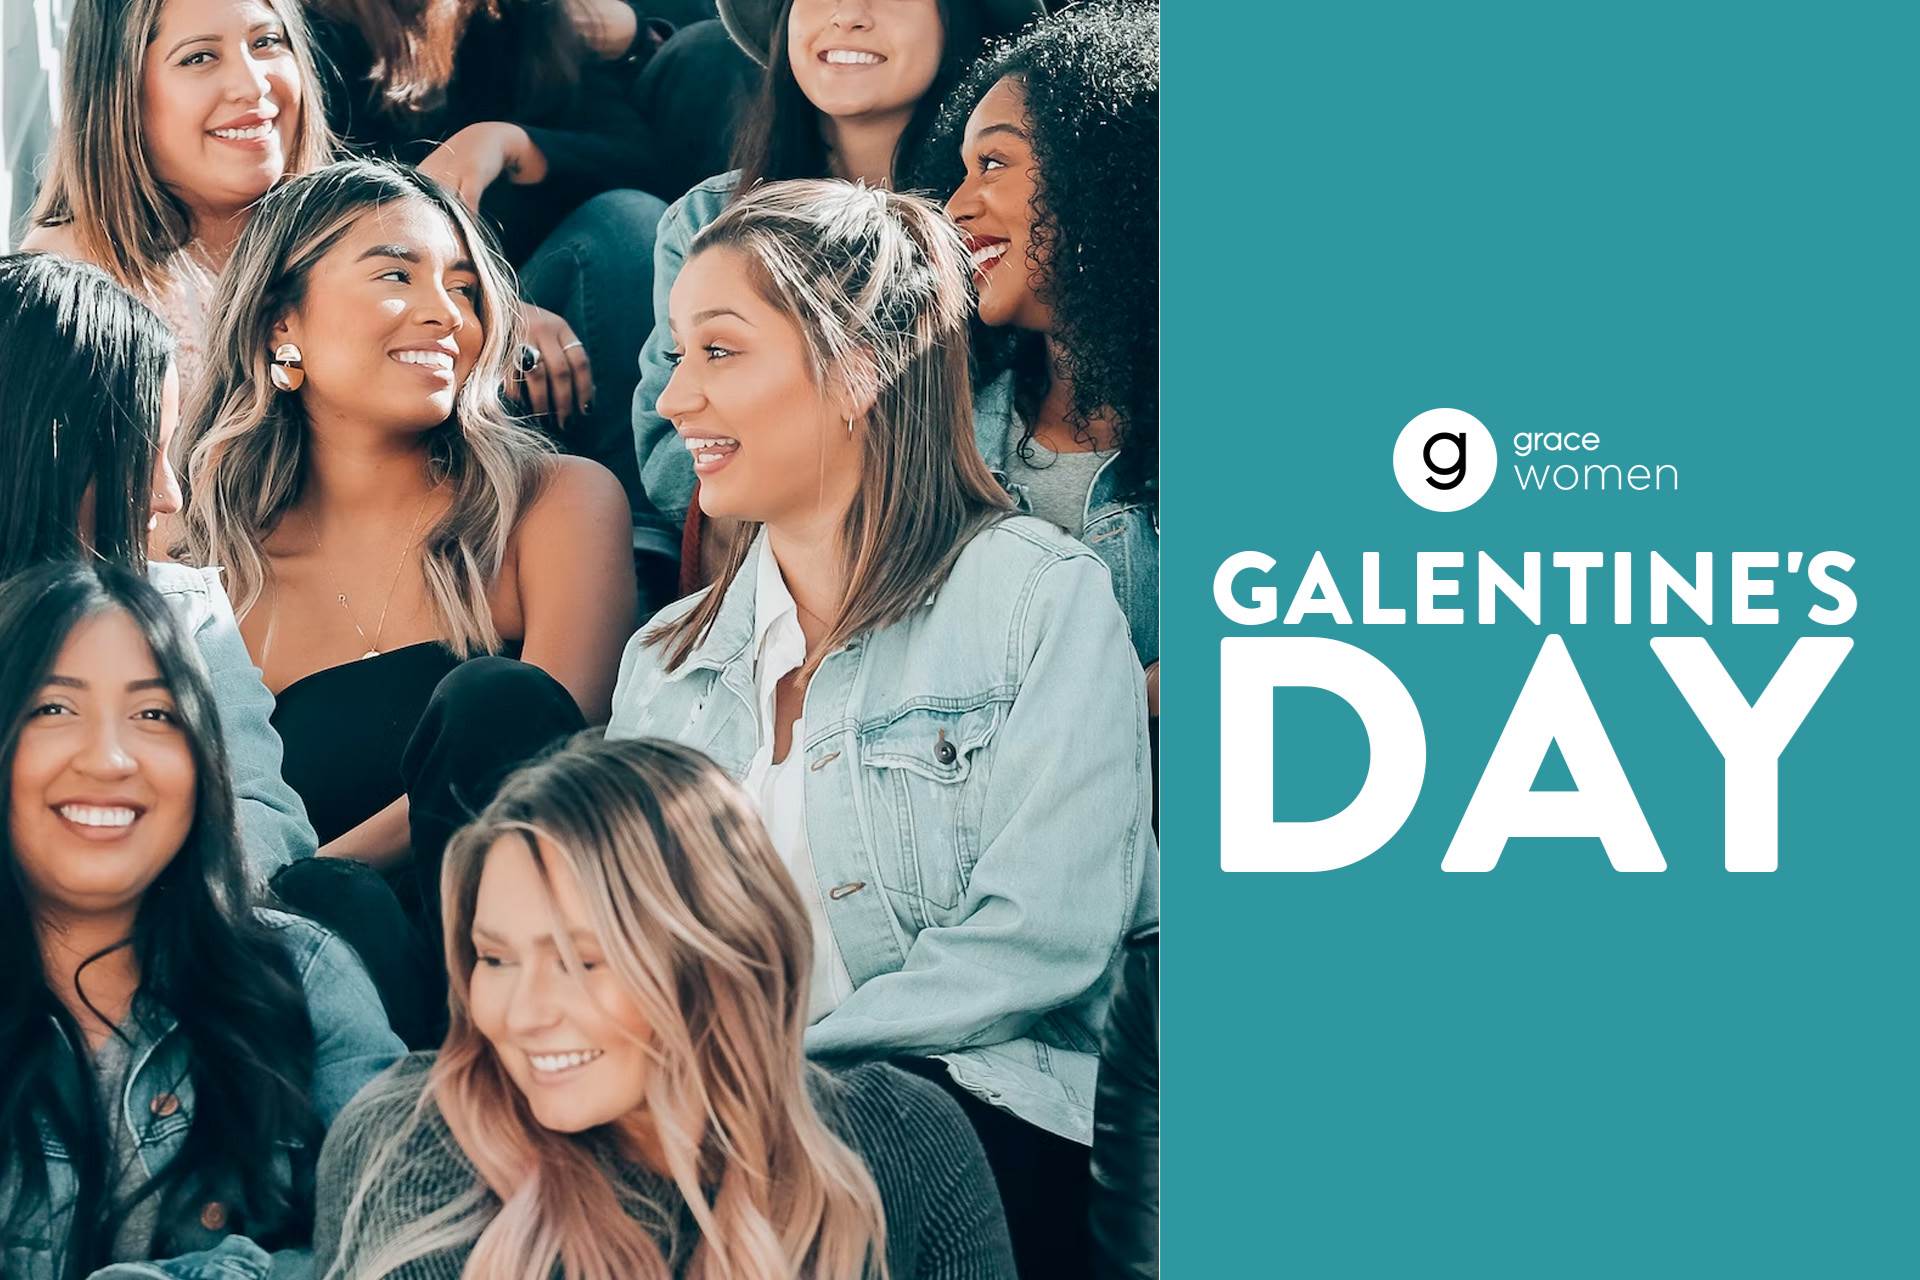 Link to Galentine's Day page